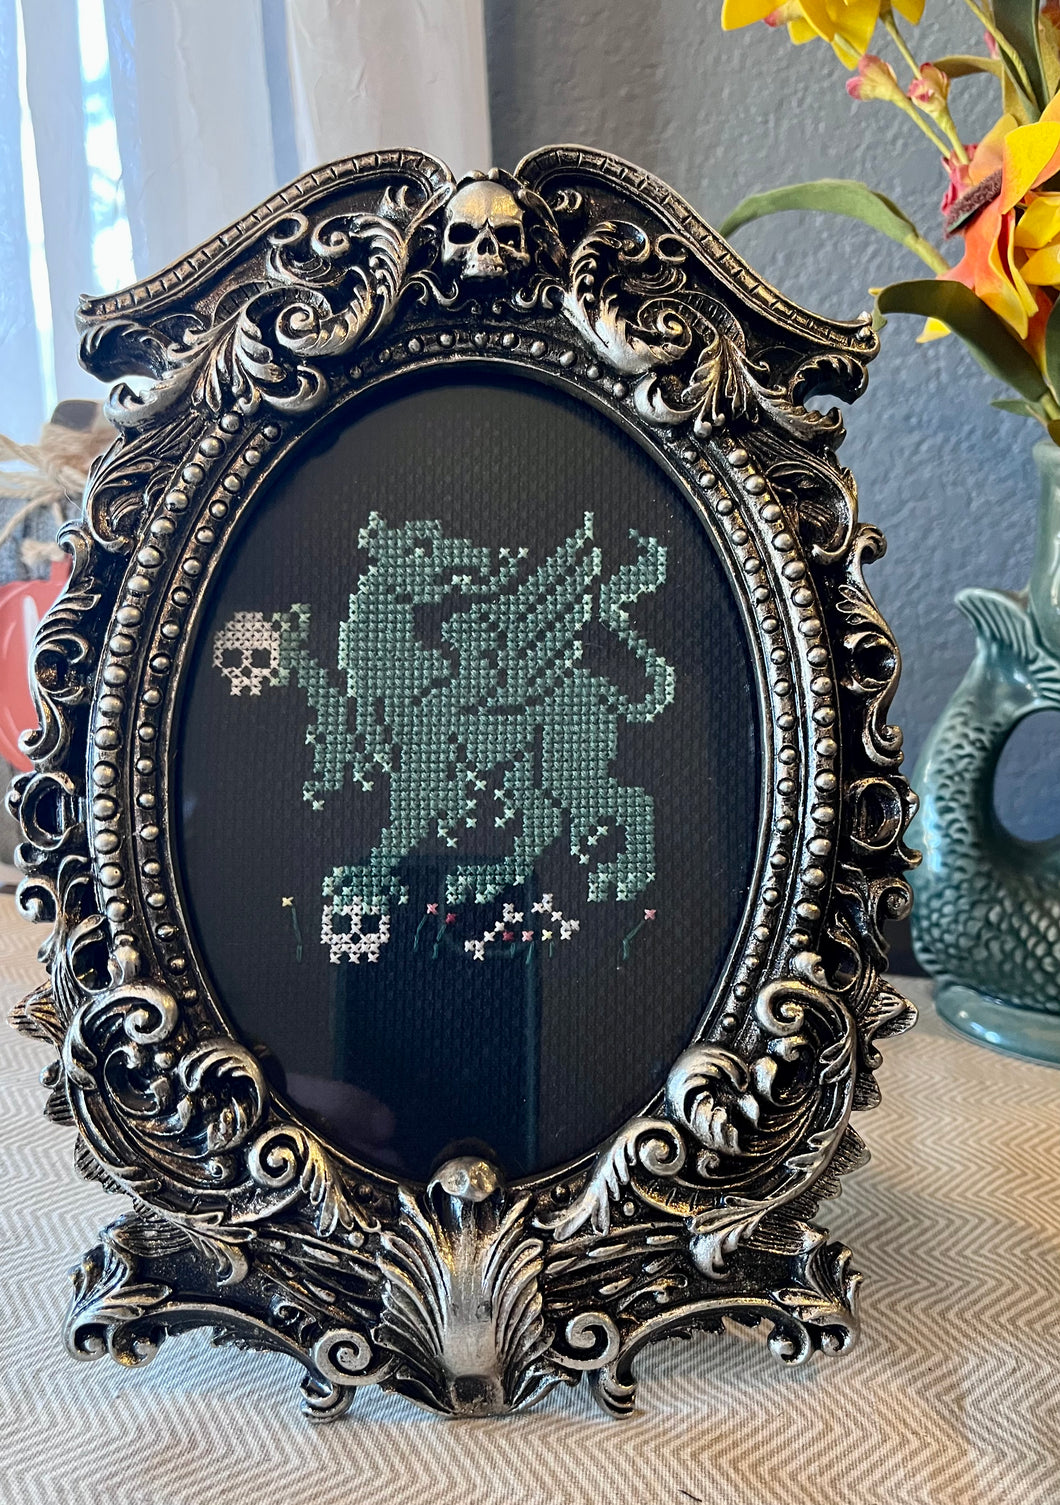 Gothic Skull Photo or Cross Stitch Frame with Free Physical Copy of Fantastical Green Dragon Cross Stitch Pattern